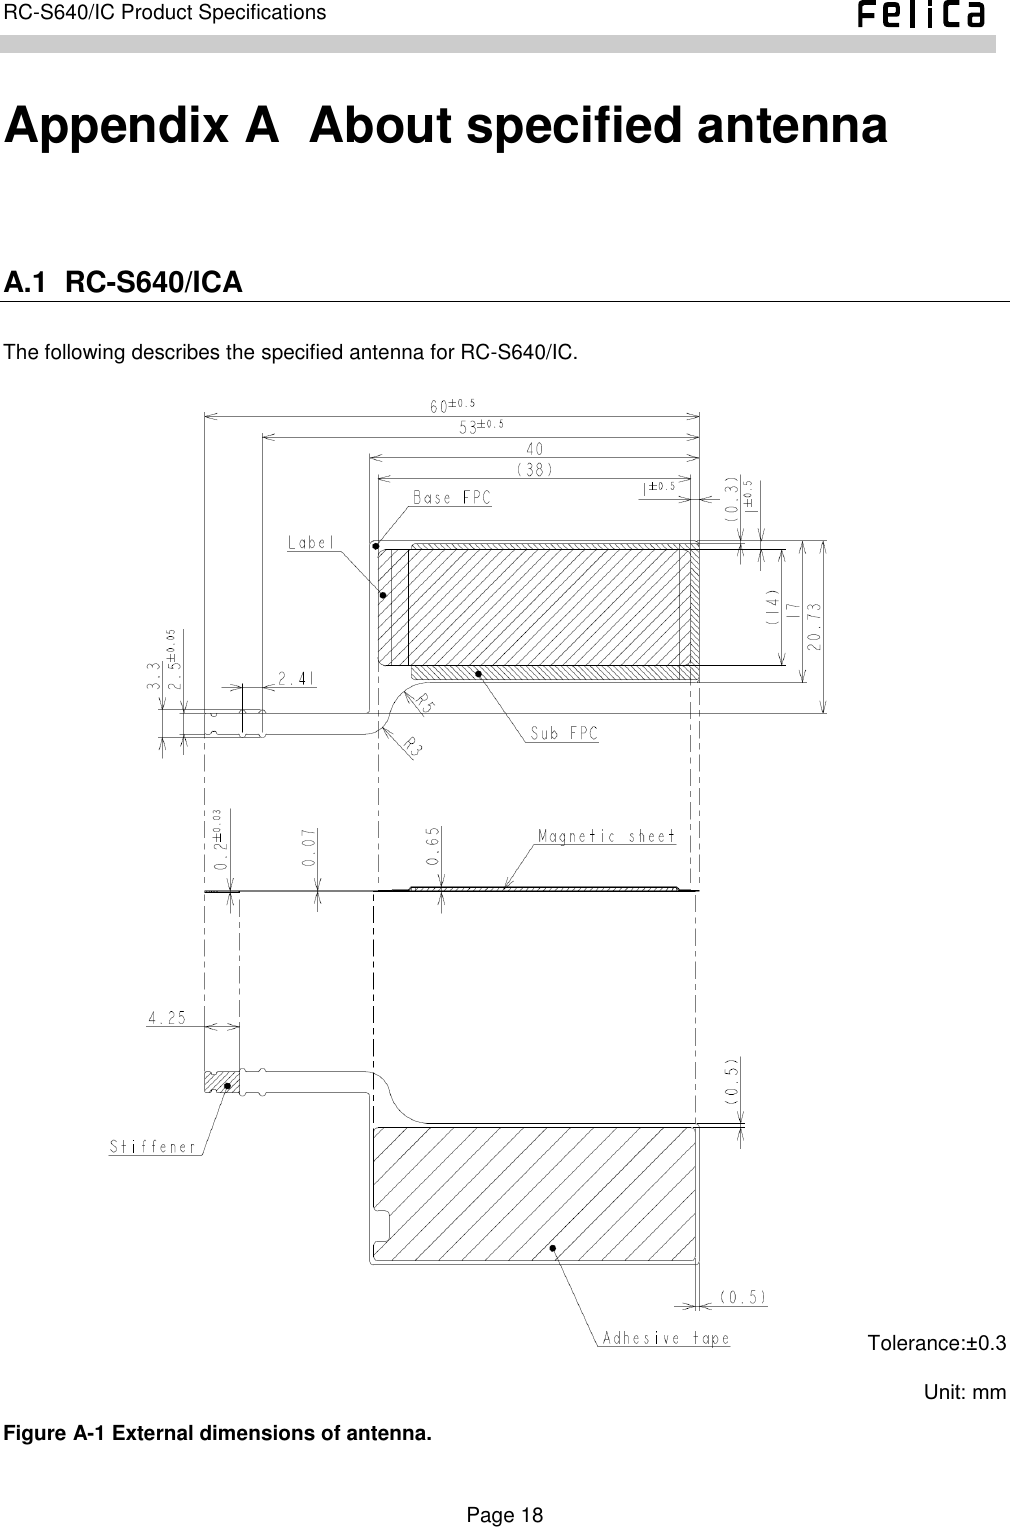    Page 18     RC-S640/IC Product Specifications    Appendix A  About specified antenna A.1  RC-S640/ICA         The following describes the specified antenna for RC-S640/IC.                               Tolerance:±0.3 Unit: mm Figure A-1 External dimensions of antenna.   